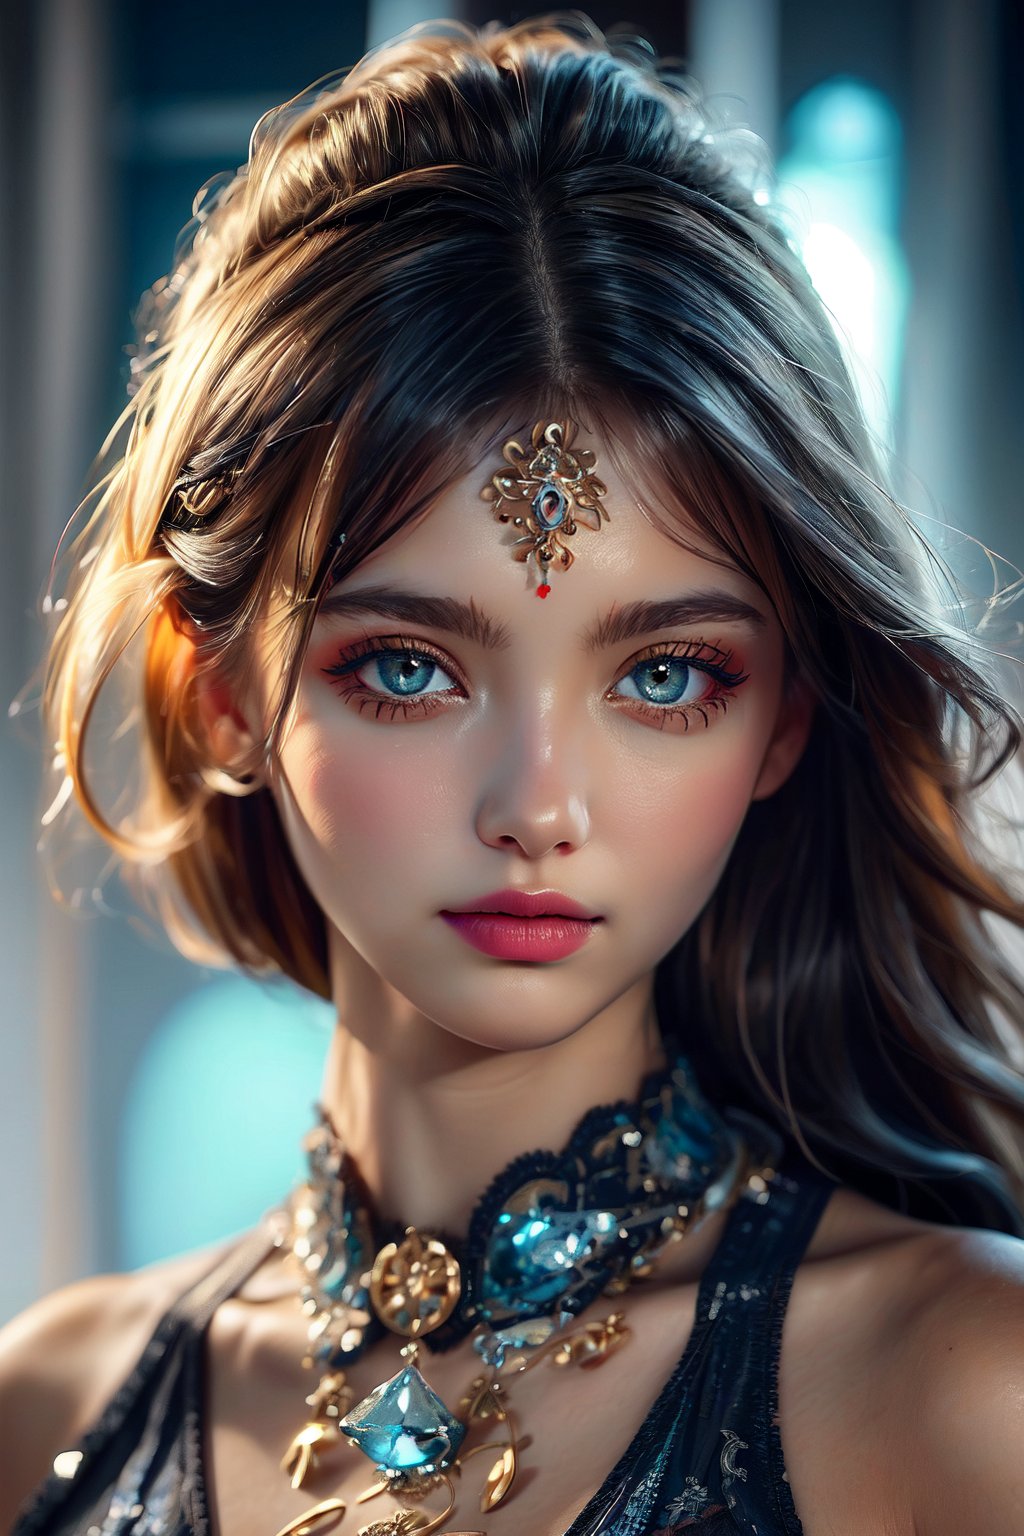 (masterpiece, high quality:1.5), 8K, HDR, 
1girl, well_defined_face, well_defined_eyes, ultra_detailed_eyes, ultra_detailed_face, by FuturEvoLab, 
ethereal lighting, immortal, elegant, porcelain skin, jet-black hair, waves, pale face, ice-blue eyes, blood-red lips, pinhole photograph, retro aesthetic, monochromatic backdrop, mysterious, enigmatic, timeless allure, the siren of the night, secrets, longing, hidden dangers, captivating, nostalgia, timeless fascination, Edge feathering and holy light, Exquisite face, Exquisite face, Exquisite face,Exquisite face,Edge feathering and holy light